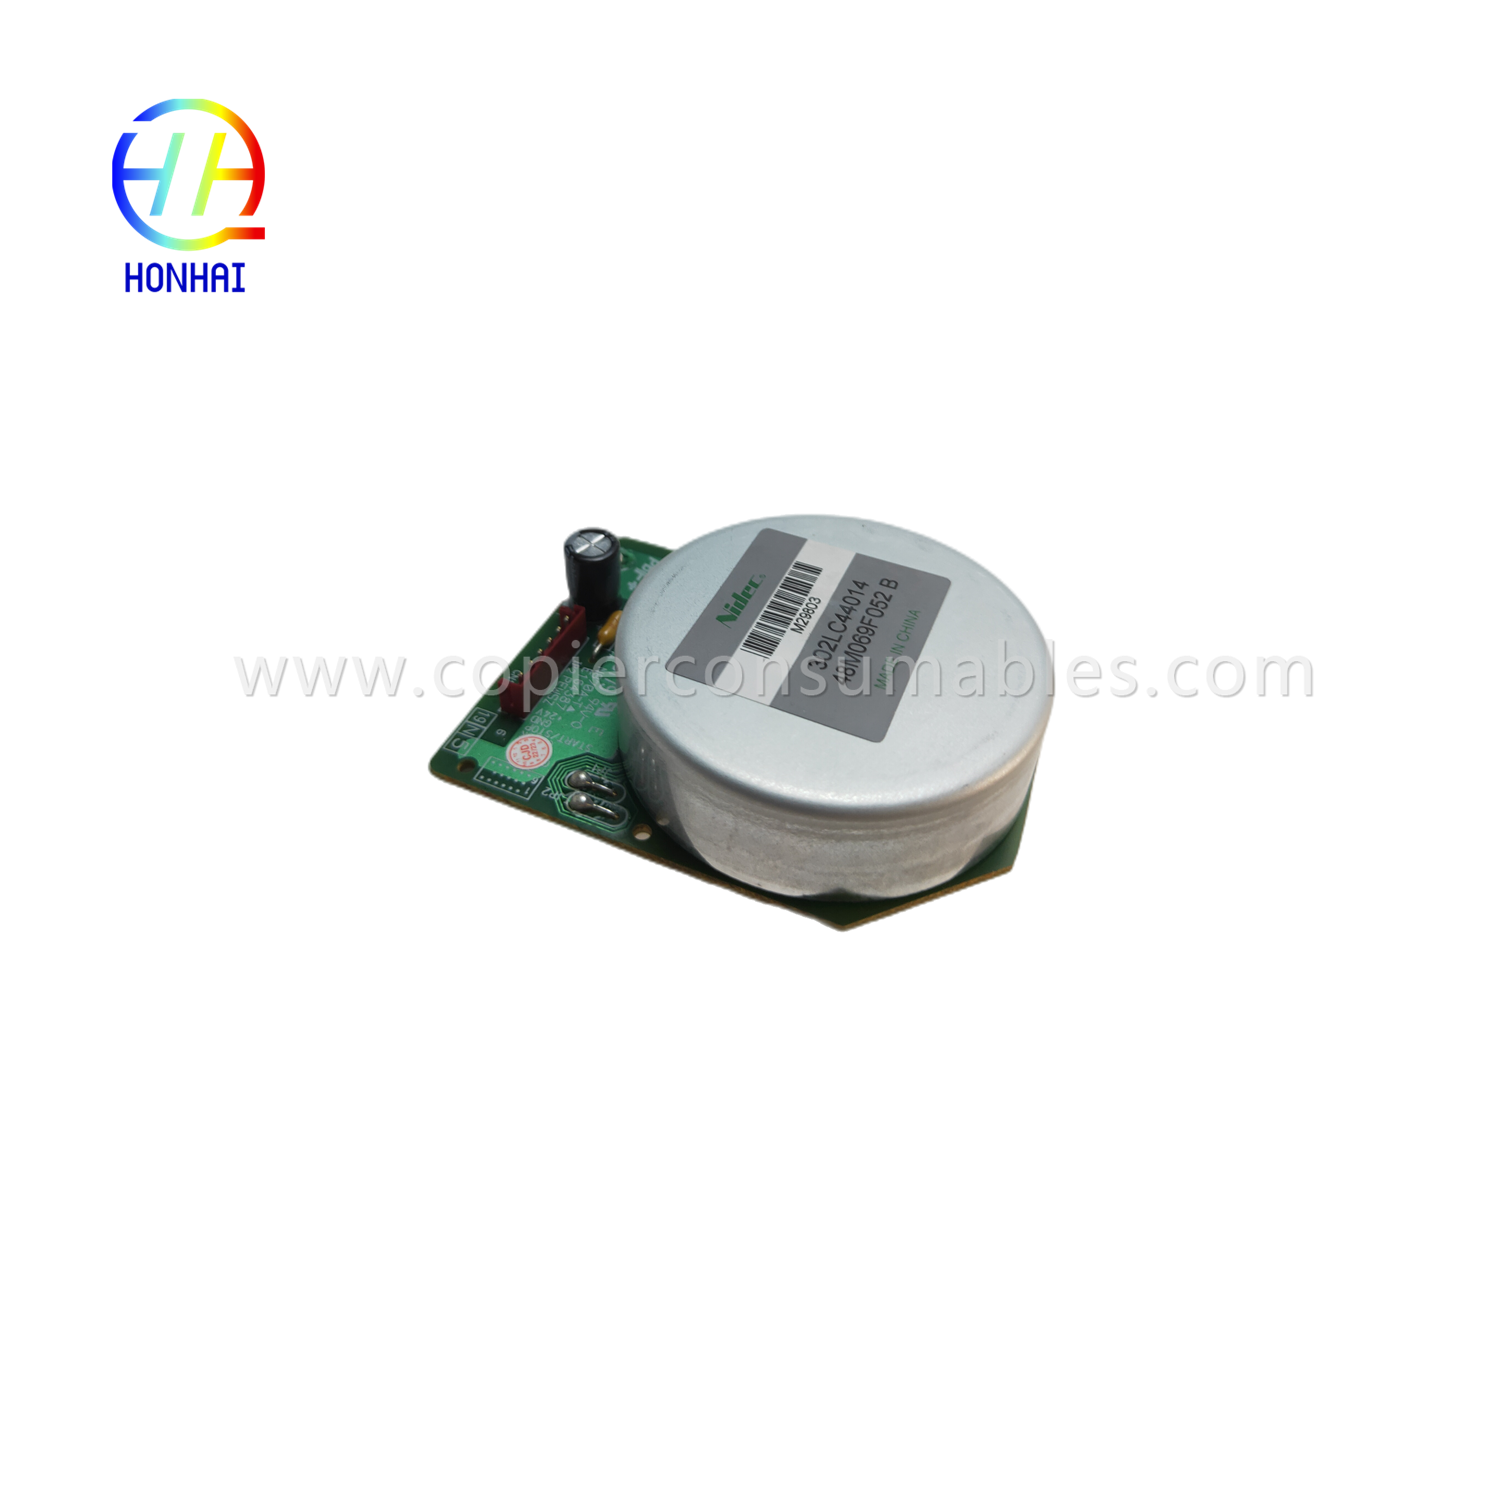 https://www.copierconsumables.com/motor-for-kyocera-ecosys-serie-parts-nr-302lc44014-48m069f052-b-product/